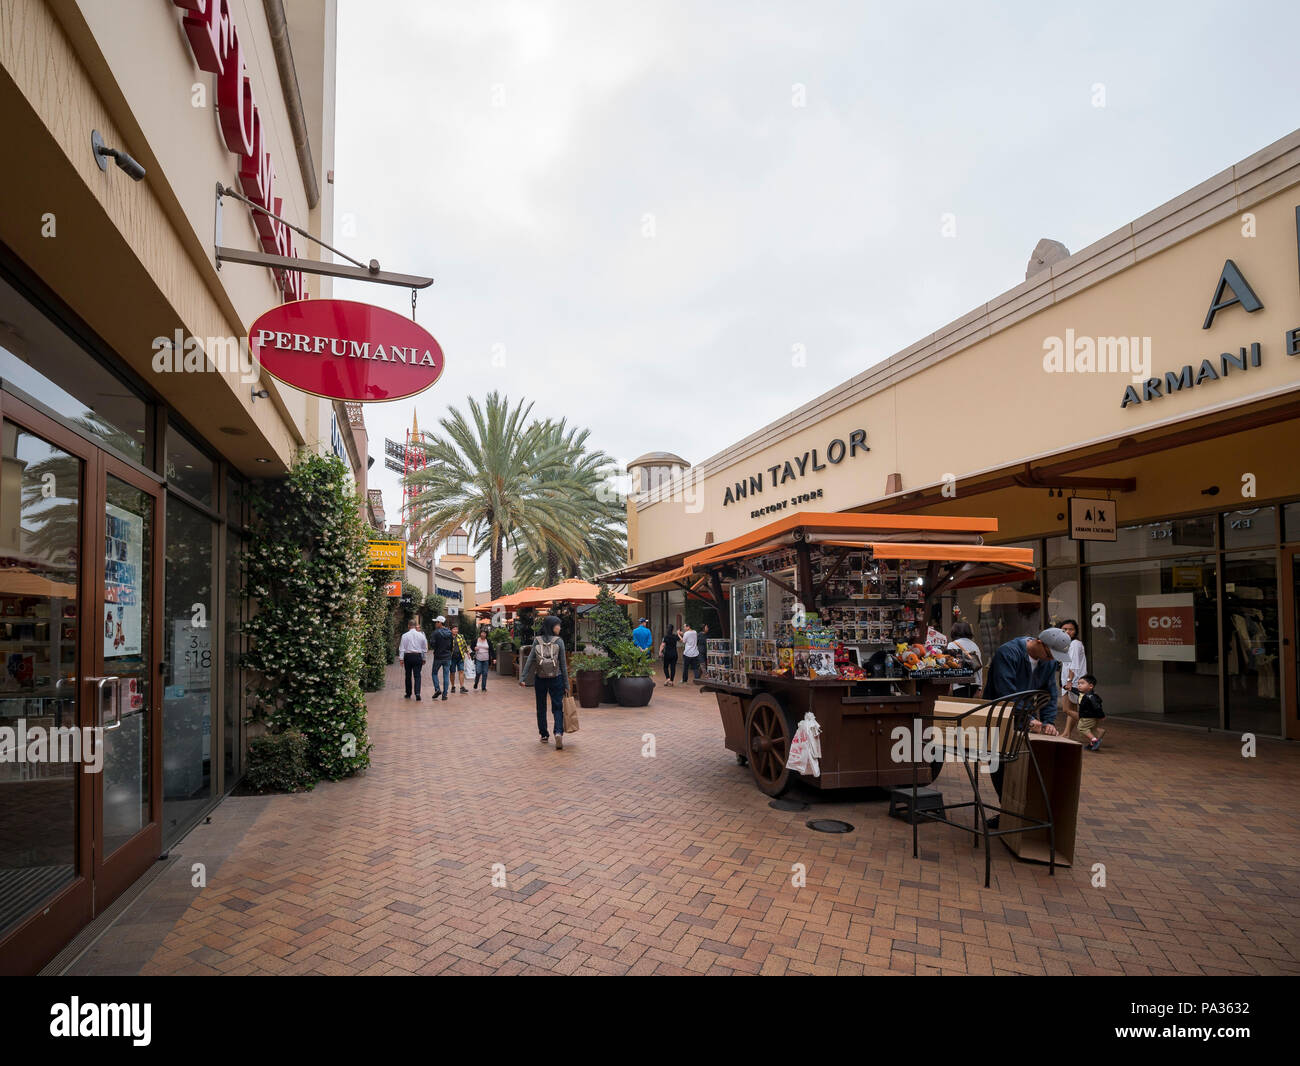 Los Angeles, JUN 24: The famous downtown Citadel Outlets on JUN 24, 2018 at Los Angeles, California Stock Photo